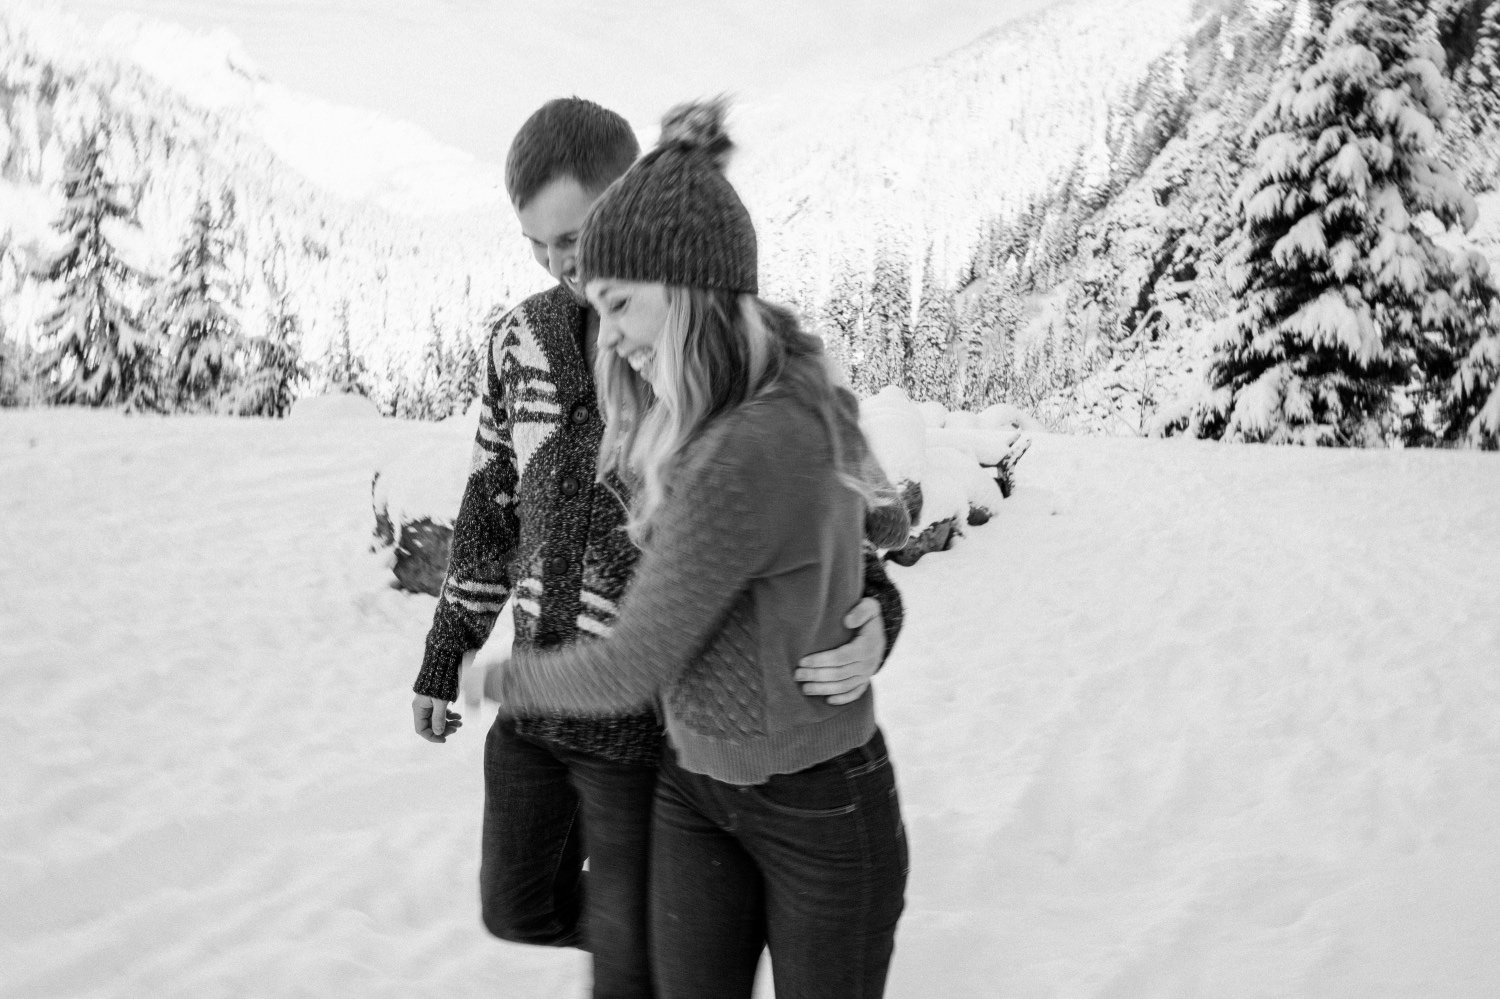 11_Snowy engagement photos at Snoqualmie Pass near Seattle, with a film-like style by Ryan Flynn Photography.jpg